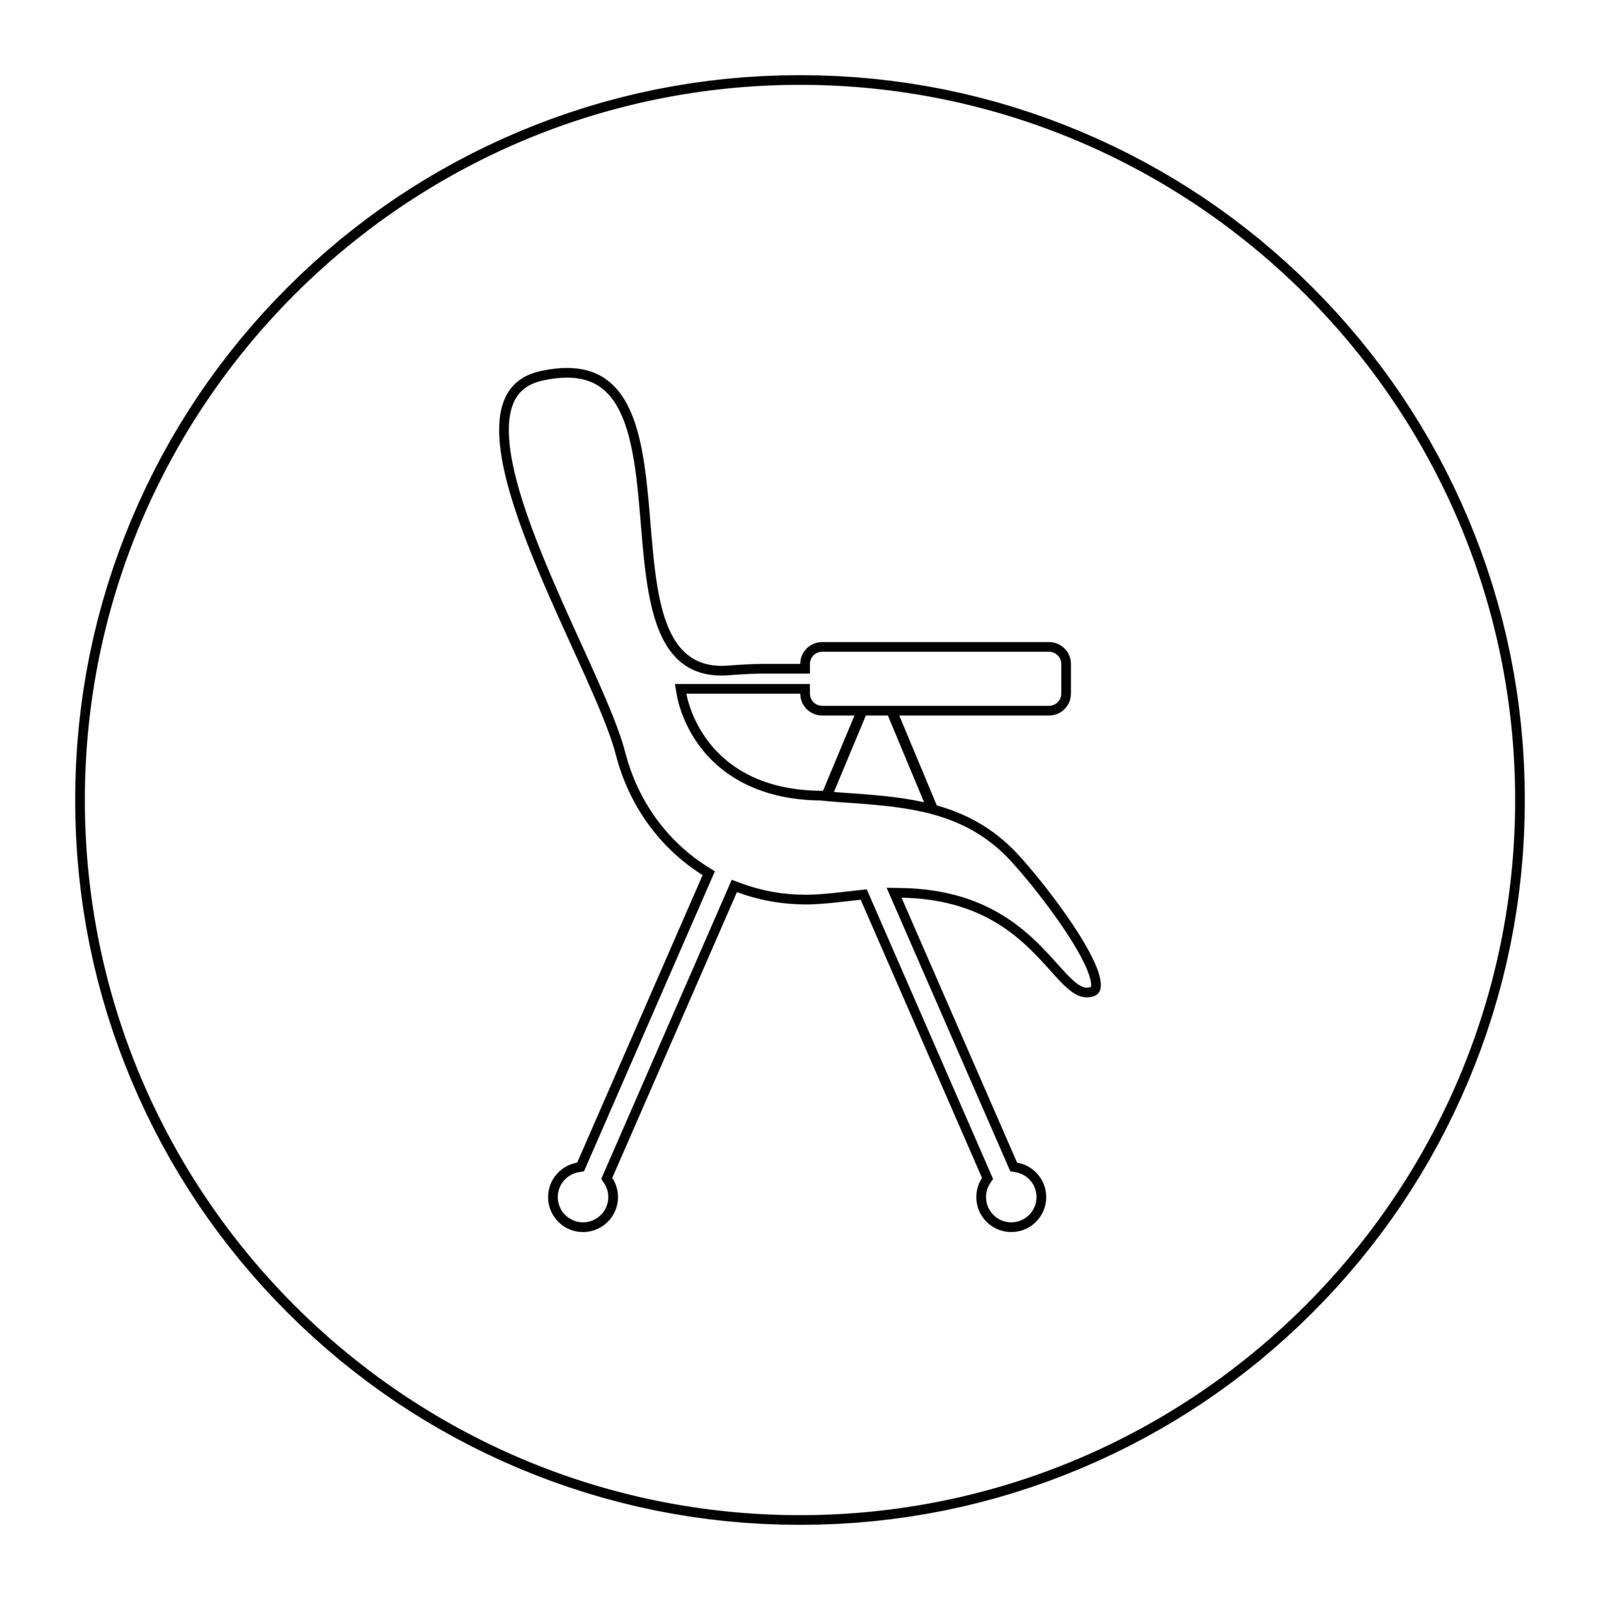 Feeding chair icon in circle round outline black color vector illustration flat style simple image